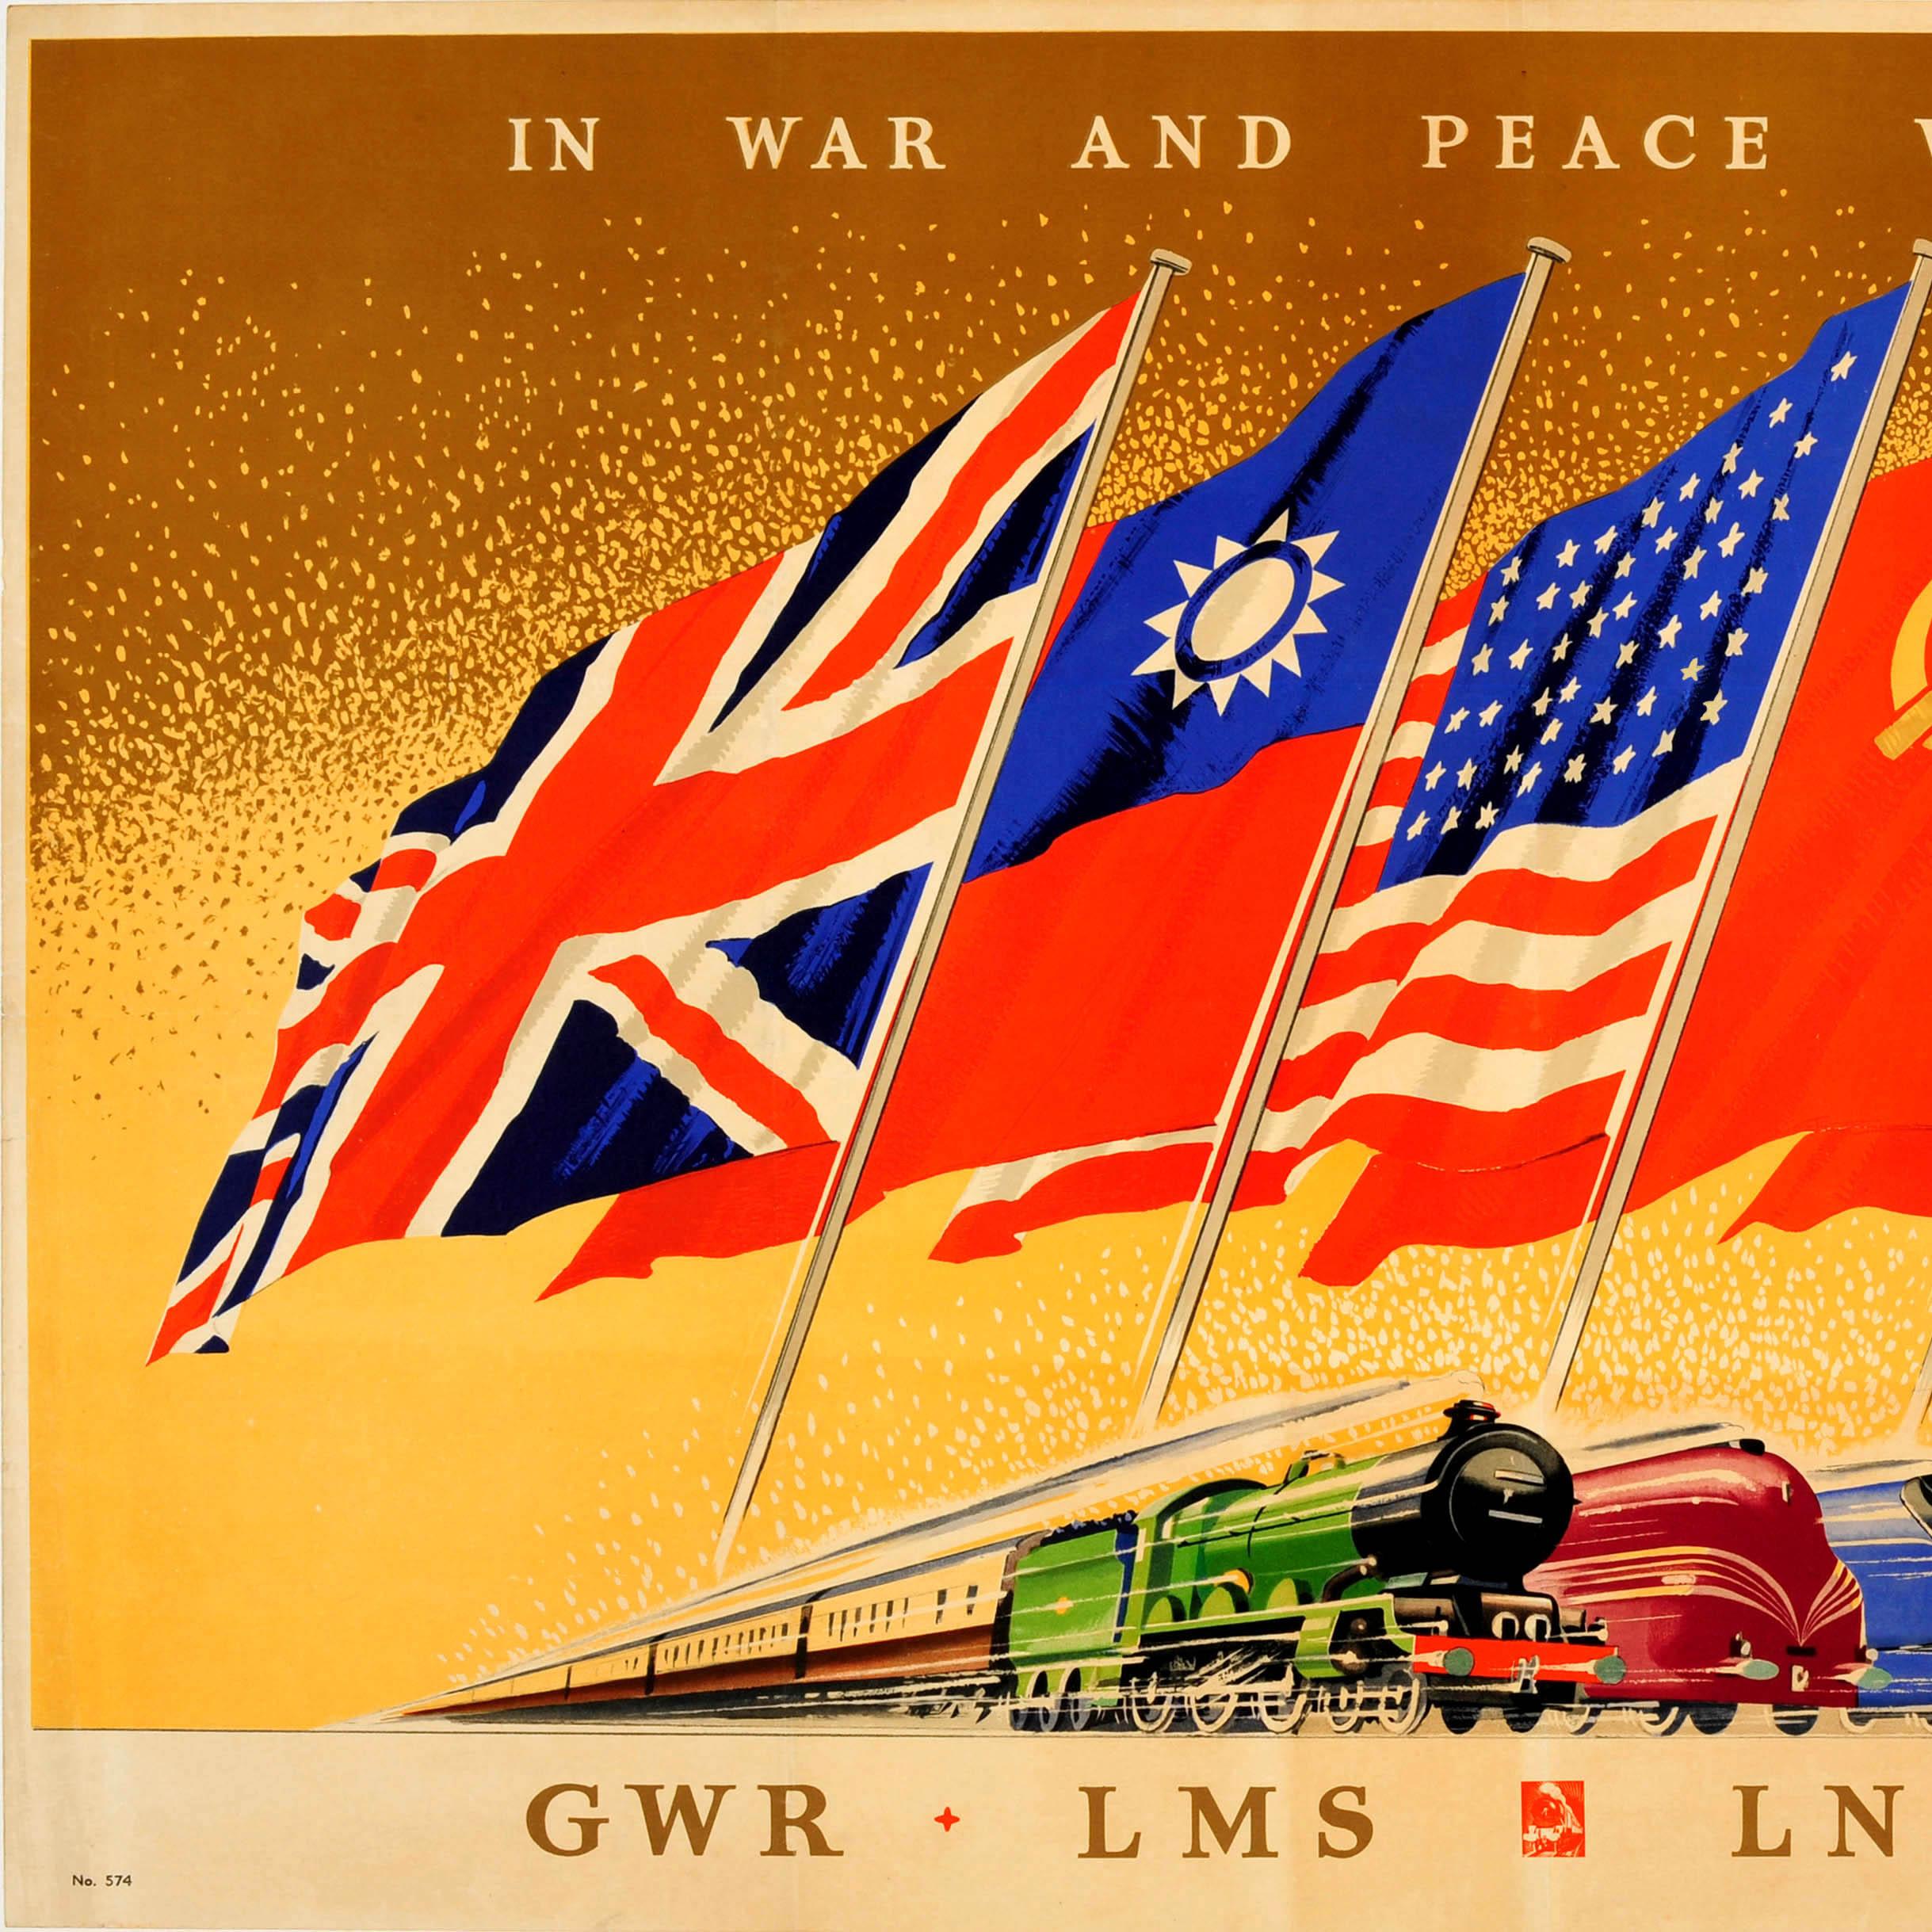 lms railway posters